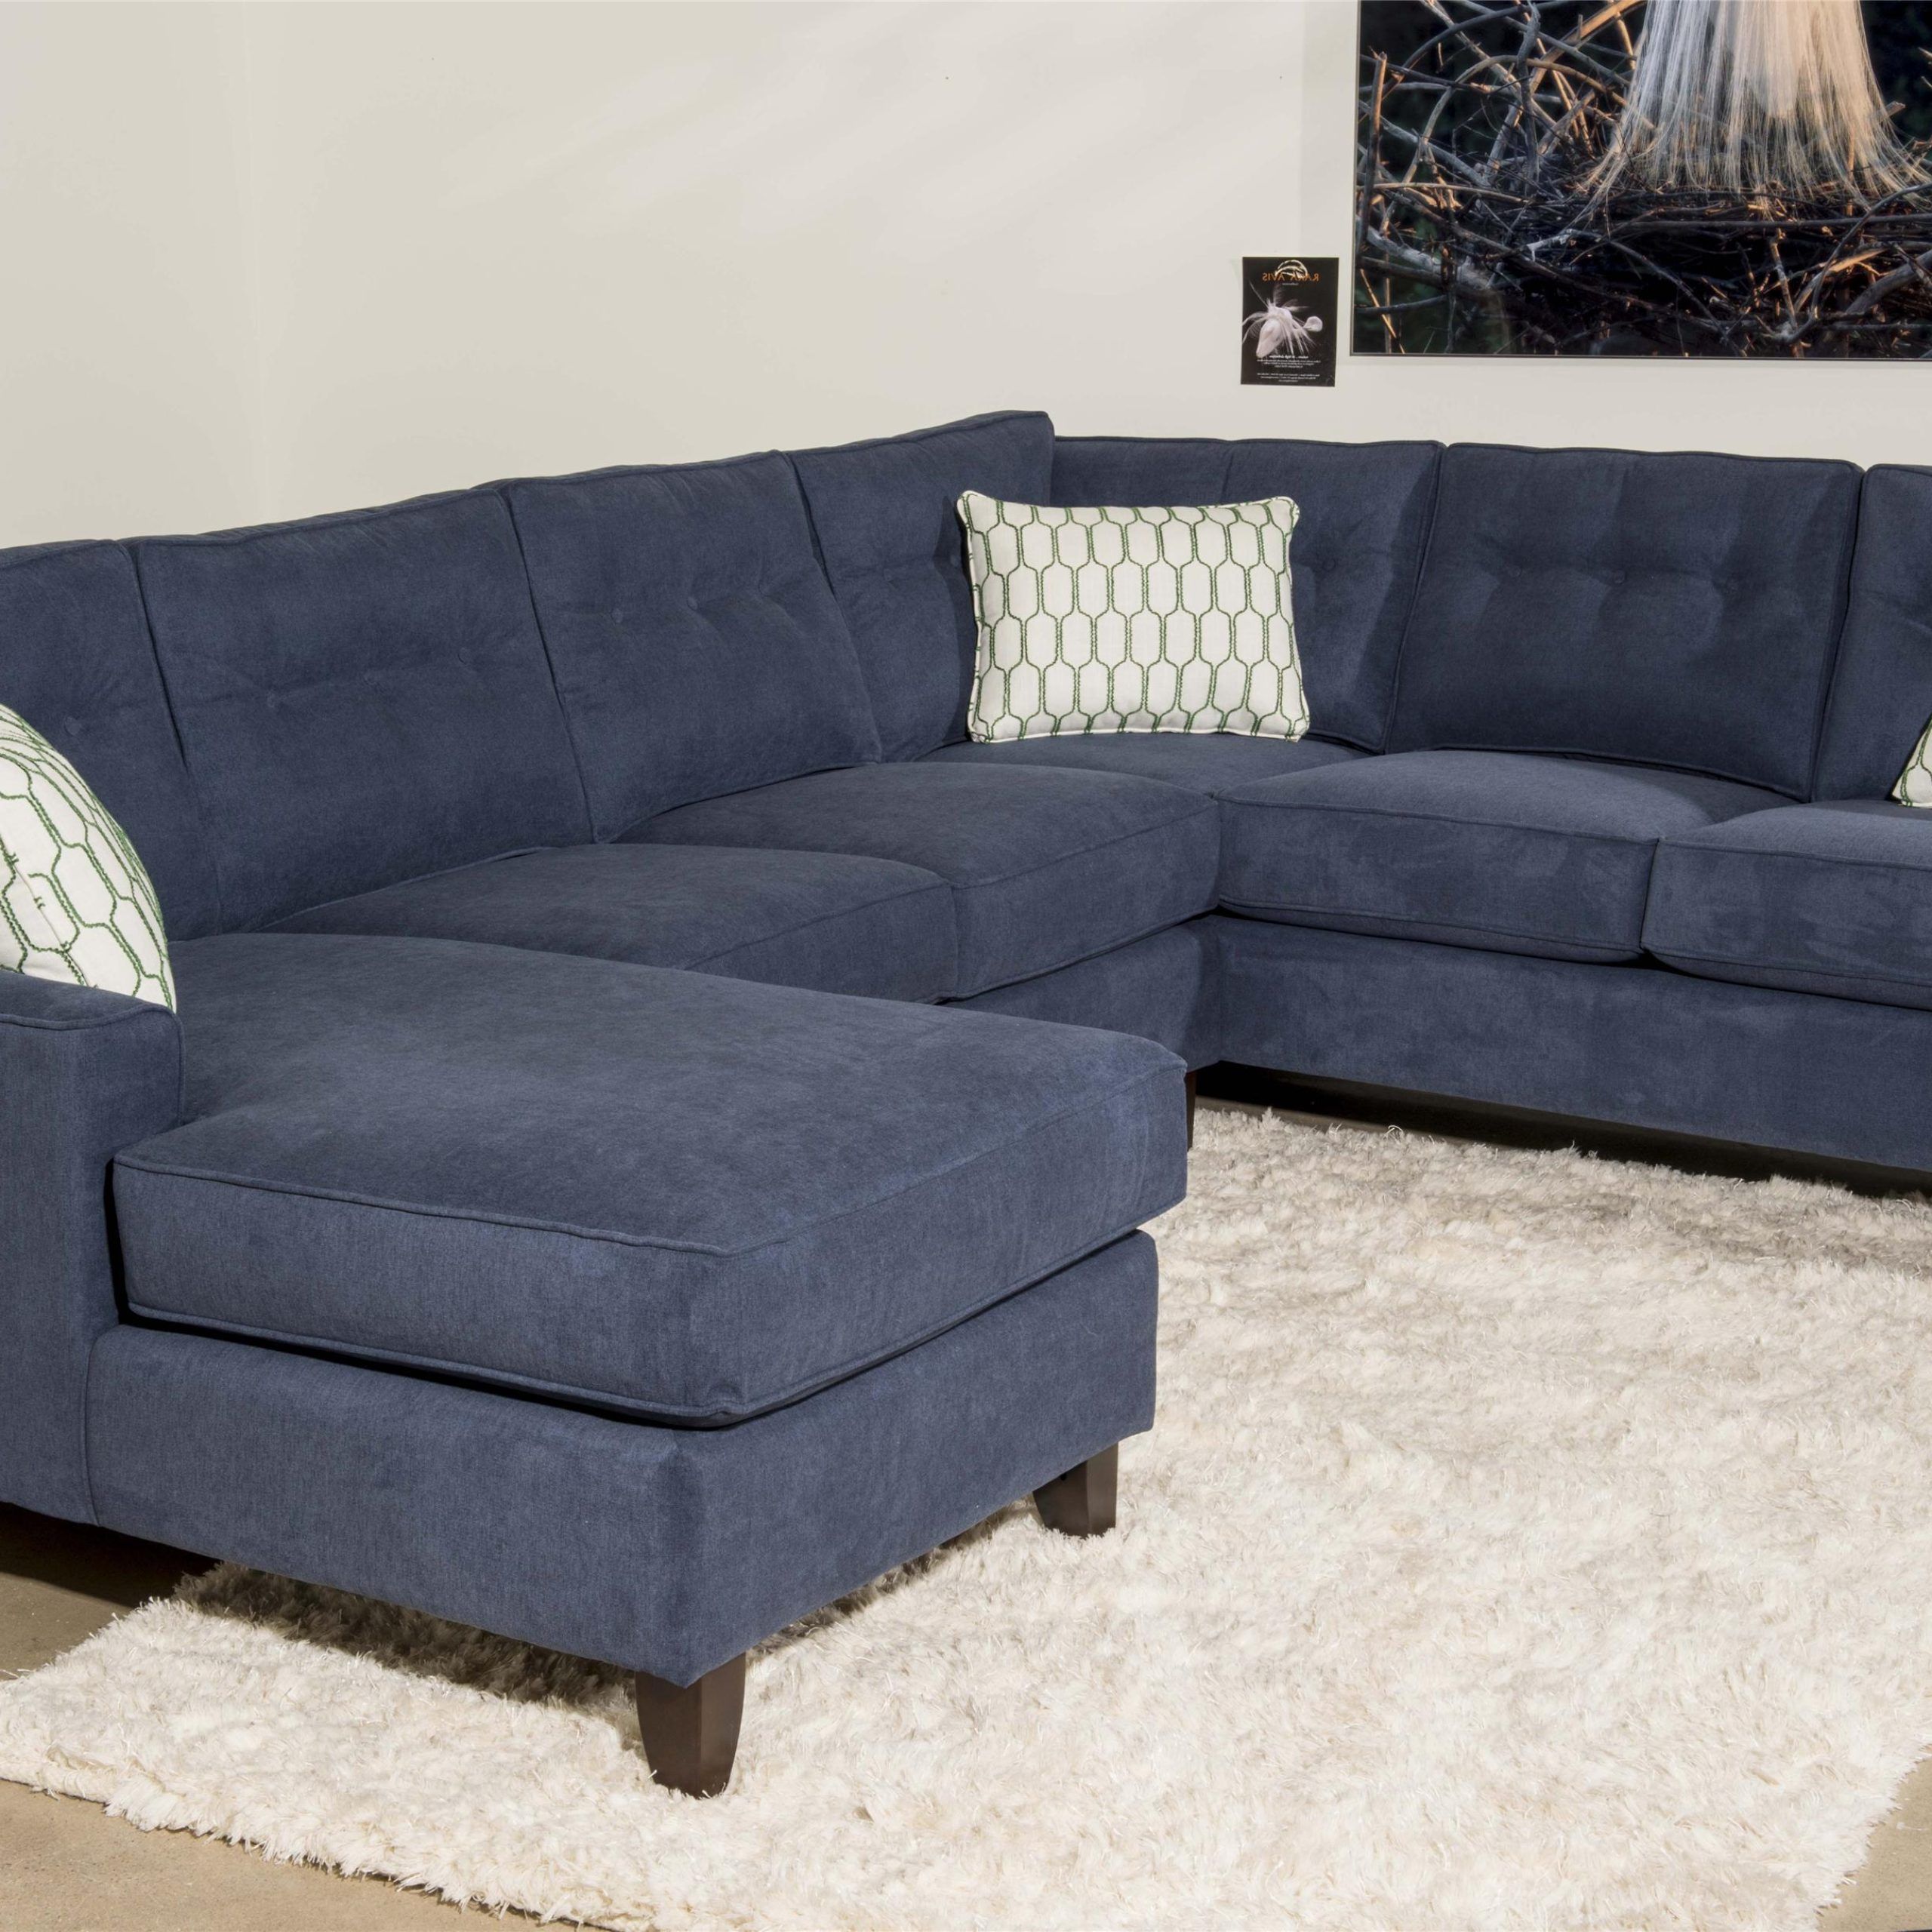 Audrina Contemporary 3 Piece Sectional Sofa With Chaiseklaussner With 3 Piece Leather Sectional Sofa Sets (View 13 of 20)